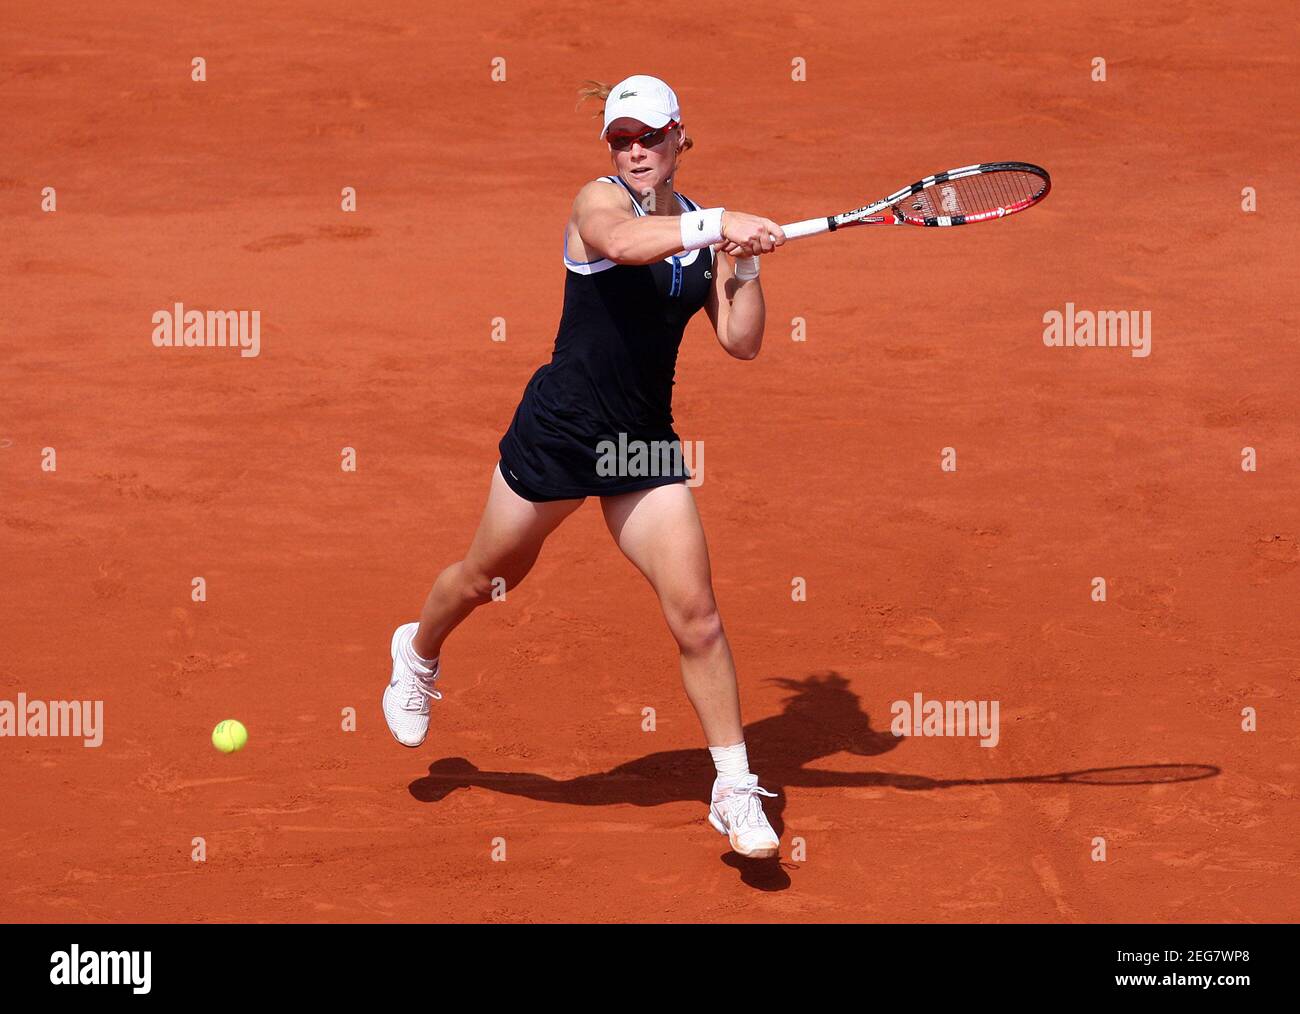 Tennis - French Open - Roland Garros, Paris, France - 2/6/10 Australia's  Samantha Stosur in action during her Quarter Final match Mandatory Credit:  Action Images / Paul Childs Livepic Stock Photo - Alamy